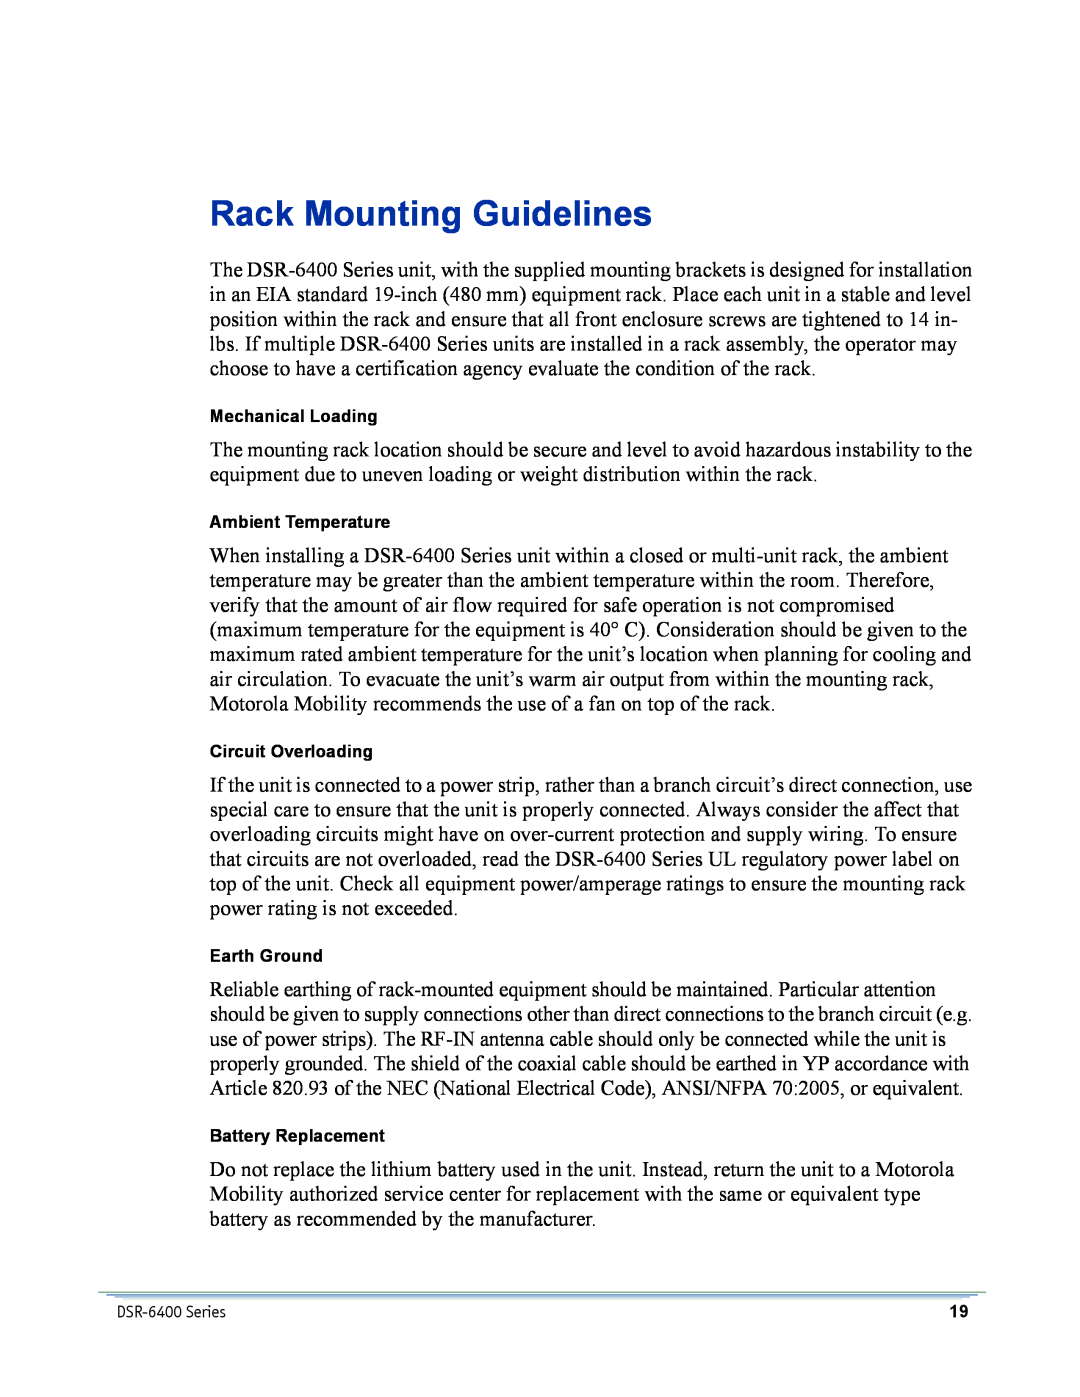 Motorola DSR-6400 Rack Mounting Guidelines, Mechanical Loading, Ambient Temperature, Circuit Overloading, Earth Ground 